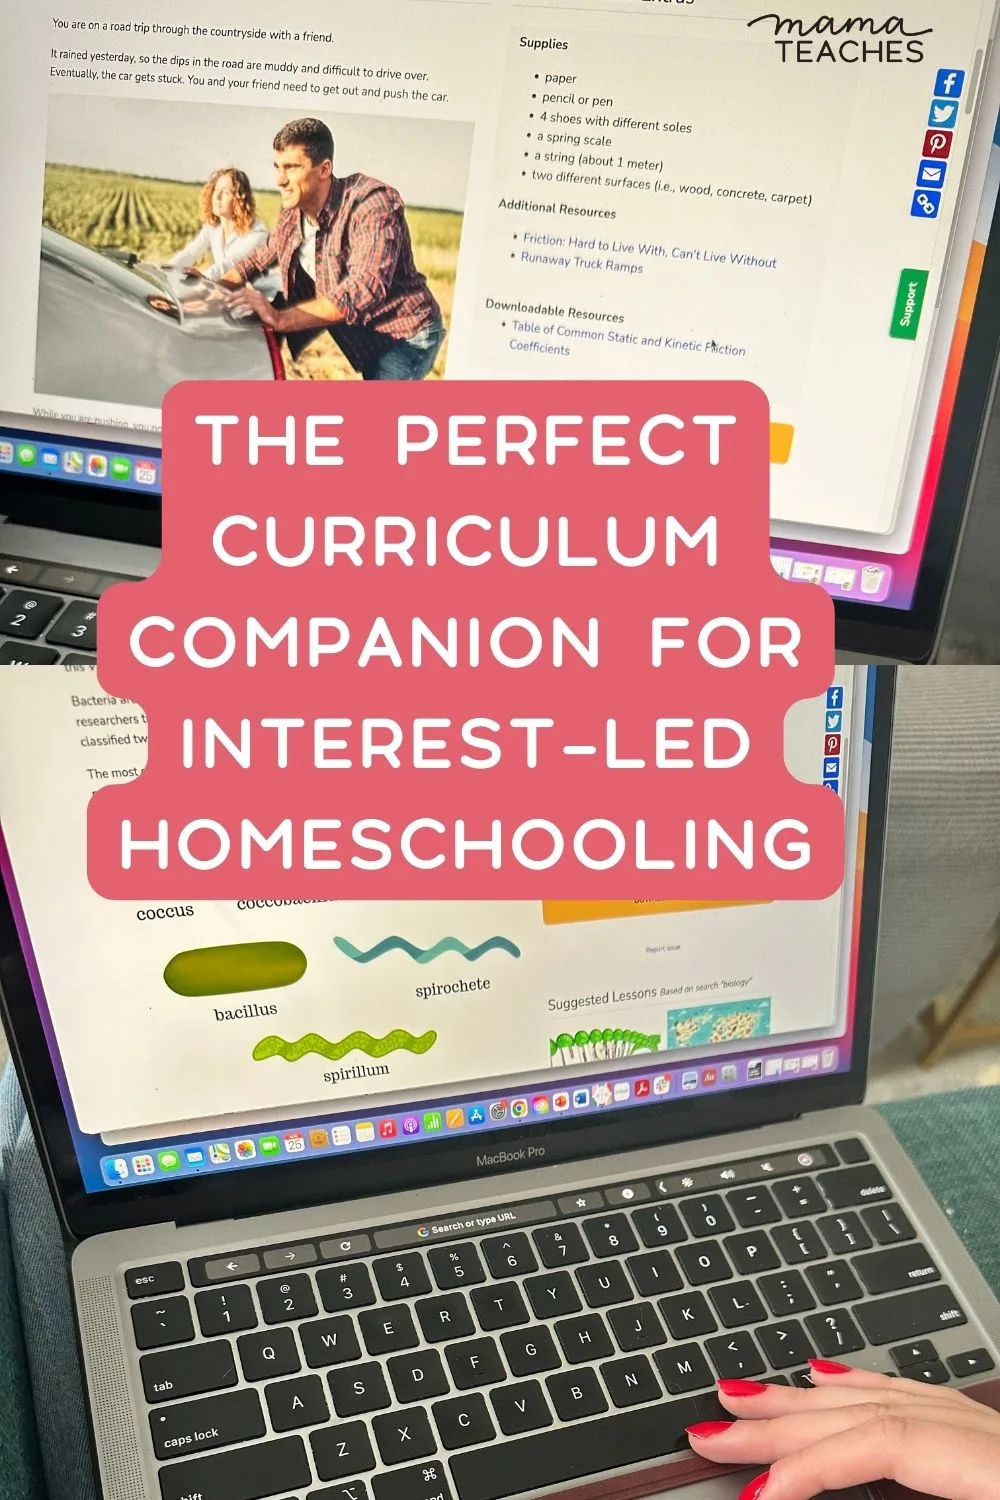 The Perfect Curriculum Companion for Interest-led Homeschooling